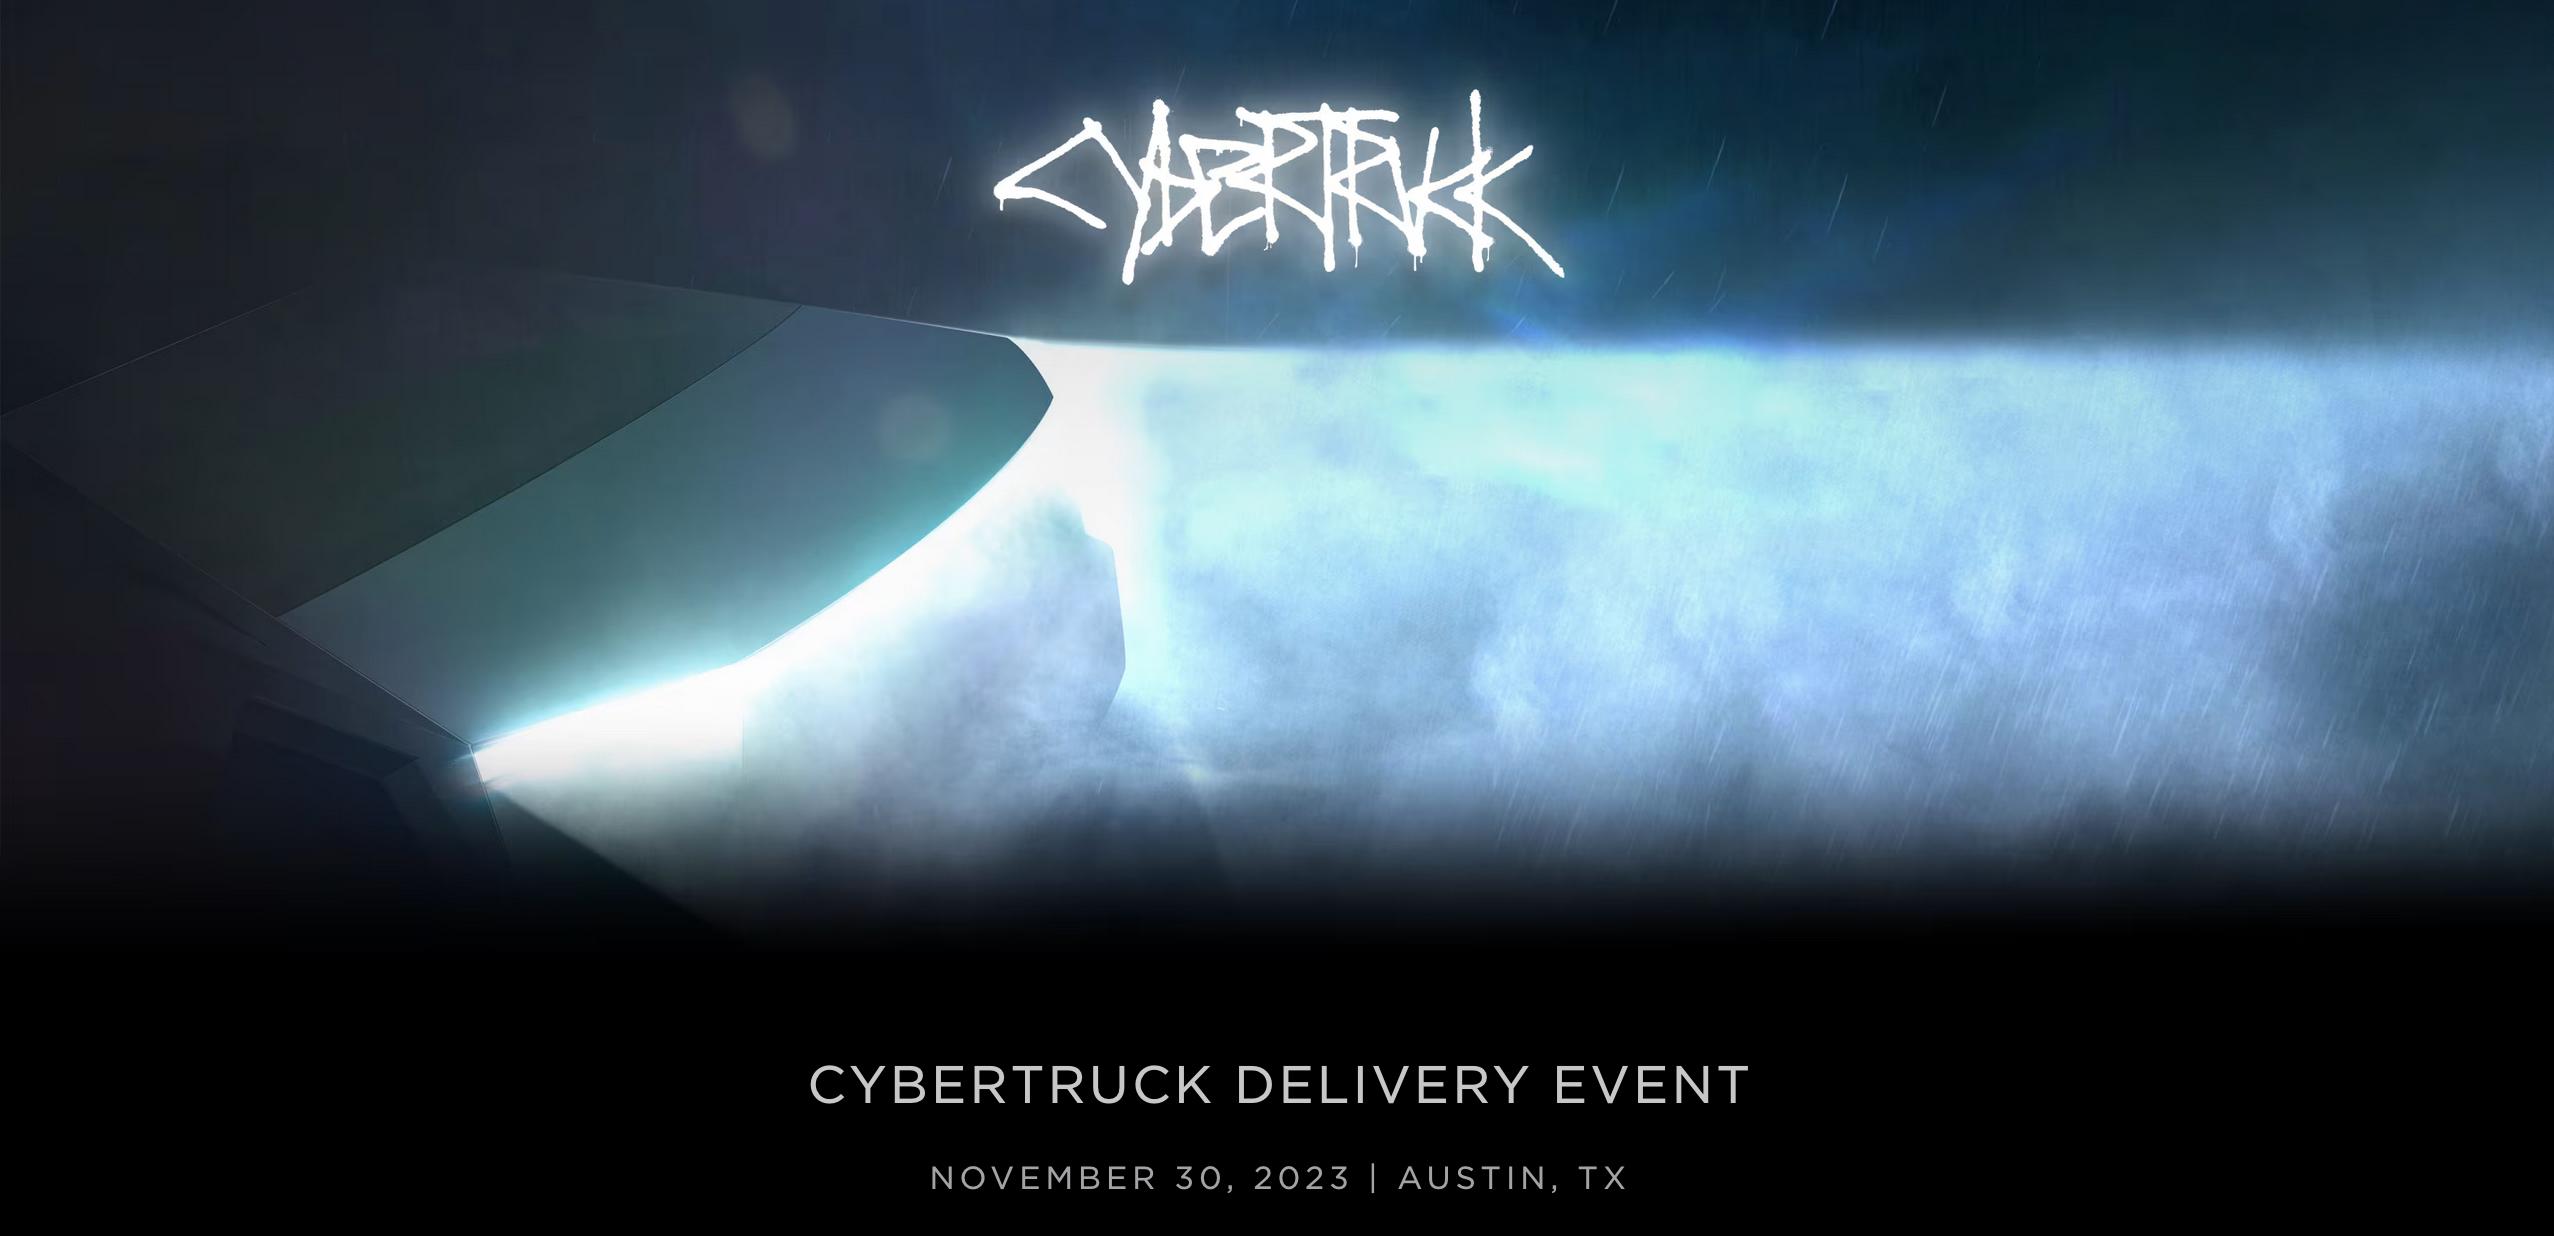 Tesla adds Cybertruck delivery event invites back to referral program